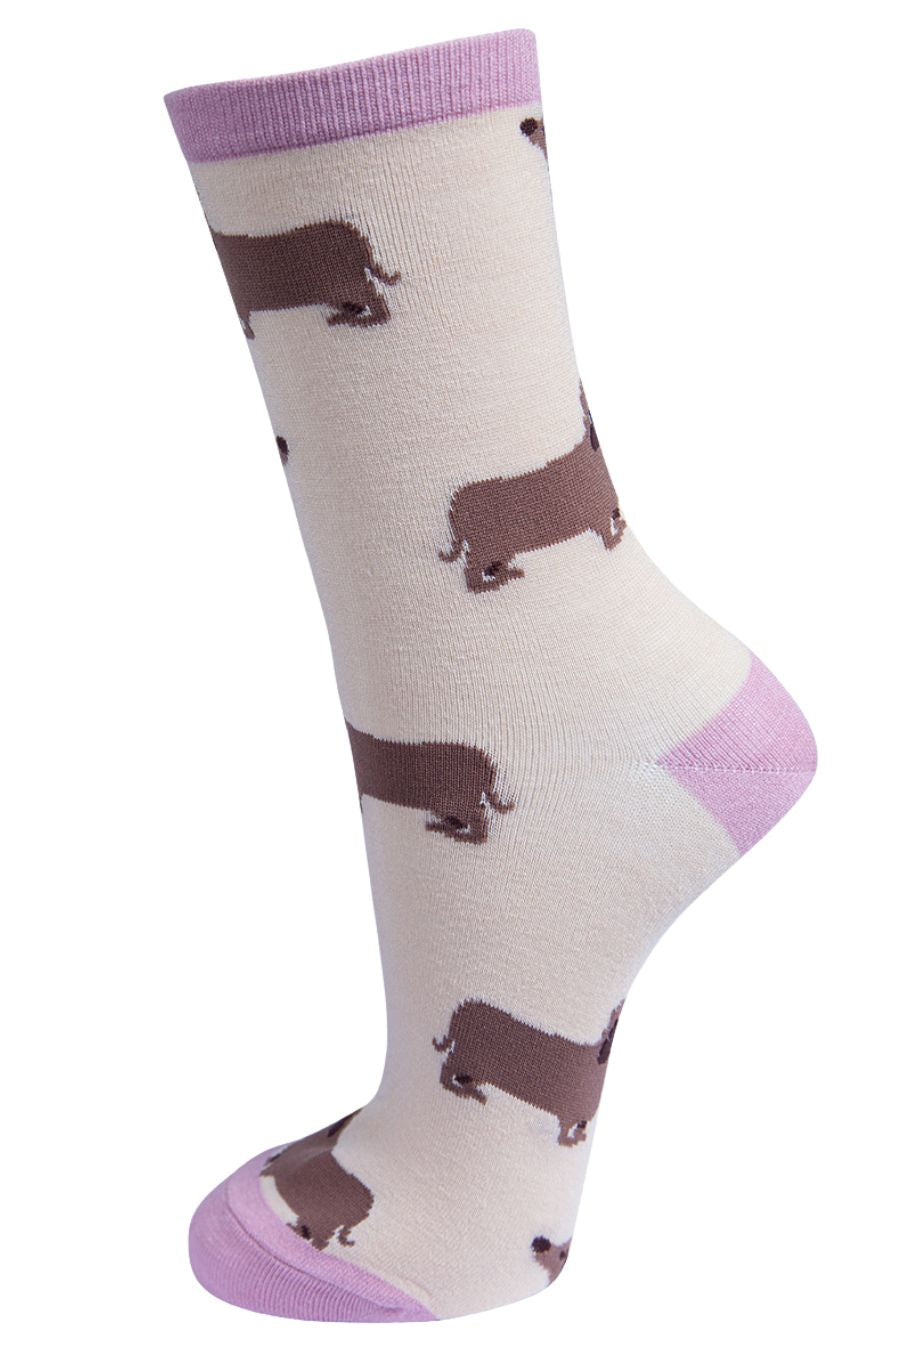 cream and pink bamboo ankle socks with an all over pattern of miniature dachshund dogs